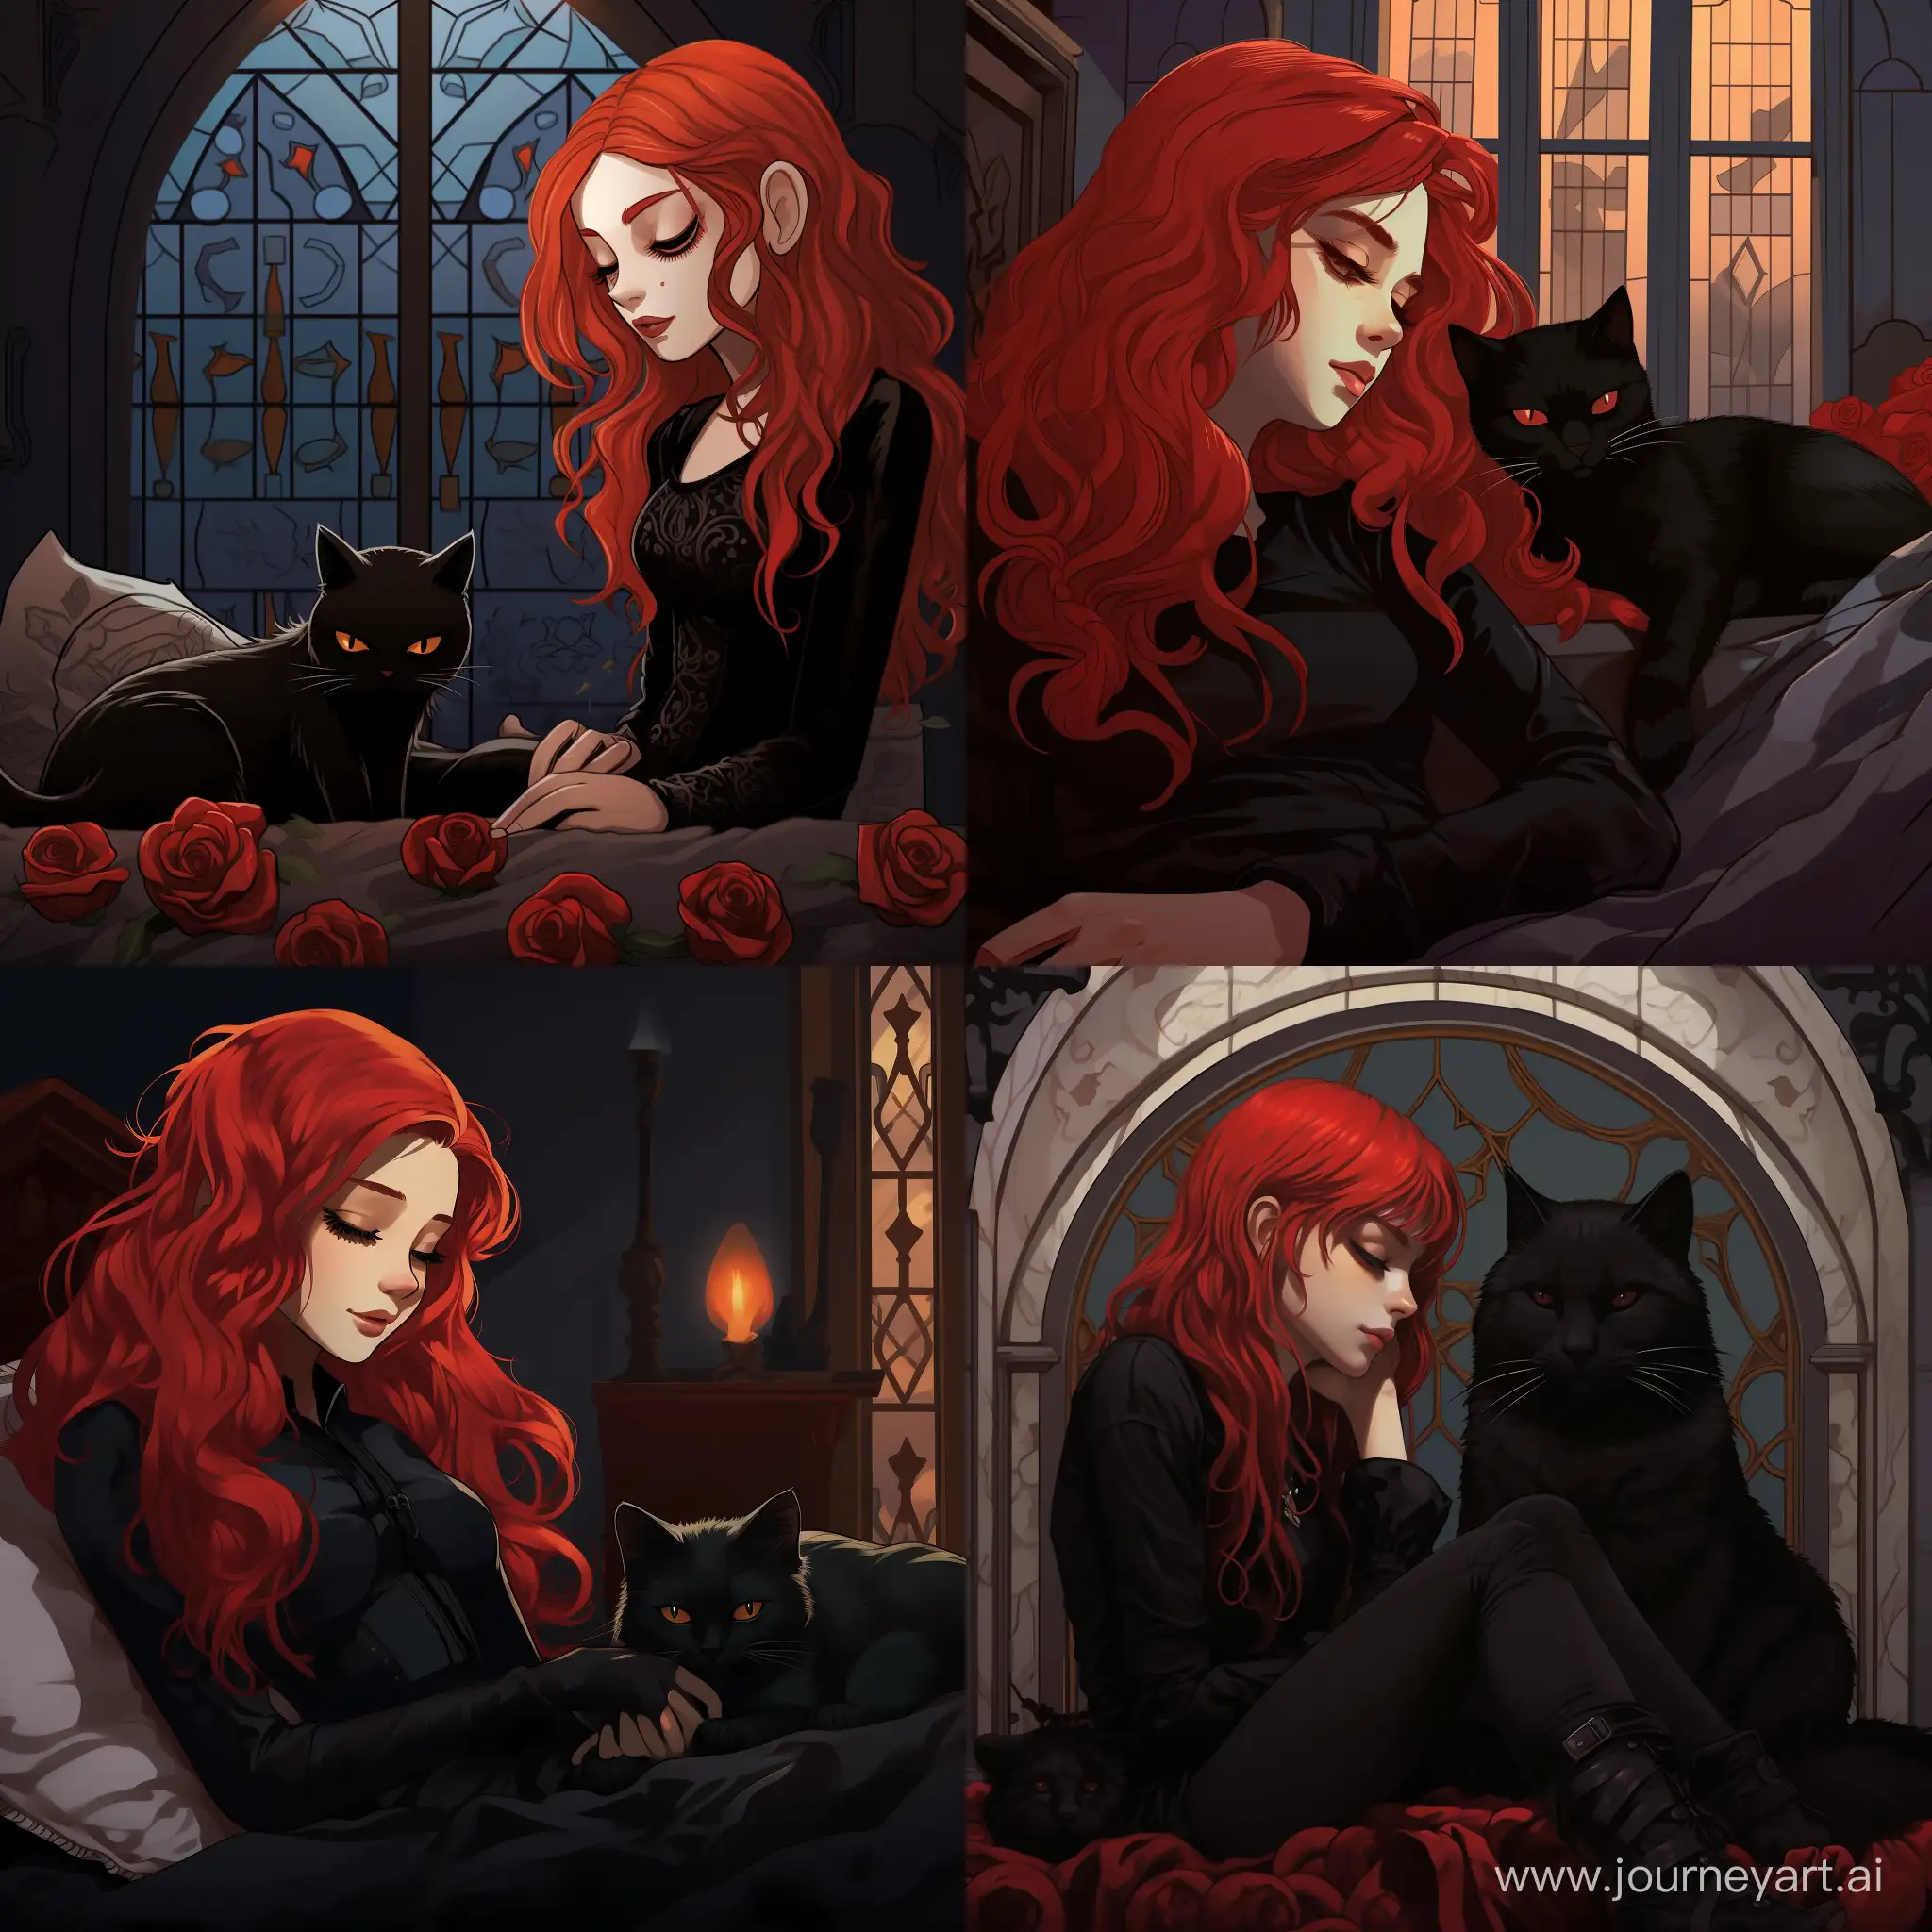 Dreaming-RedHaired-Gothic-Girl-and-Cat-in-a-Cozy-Bed